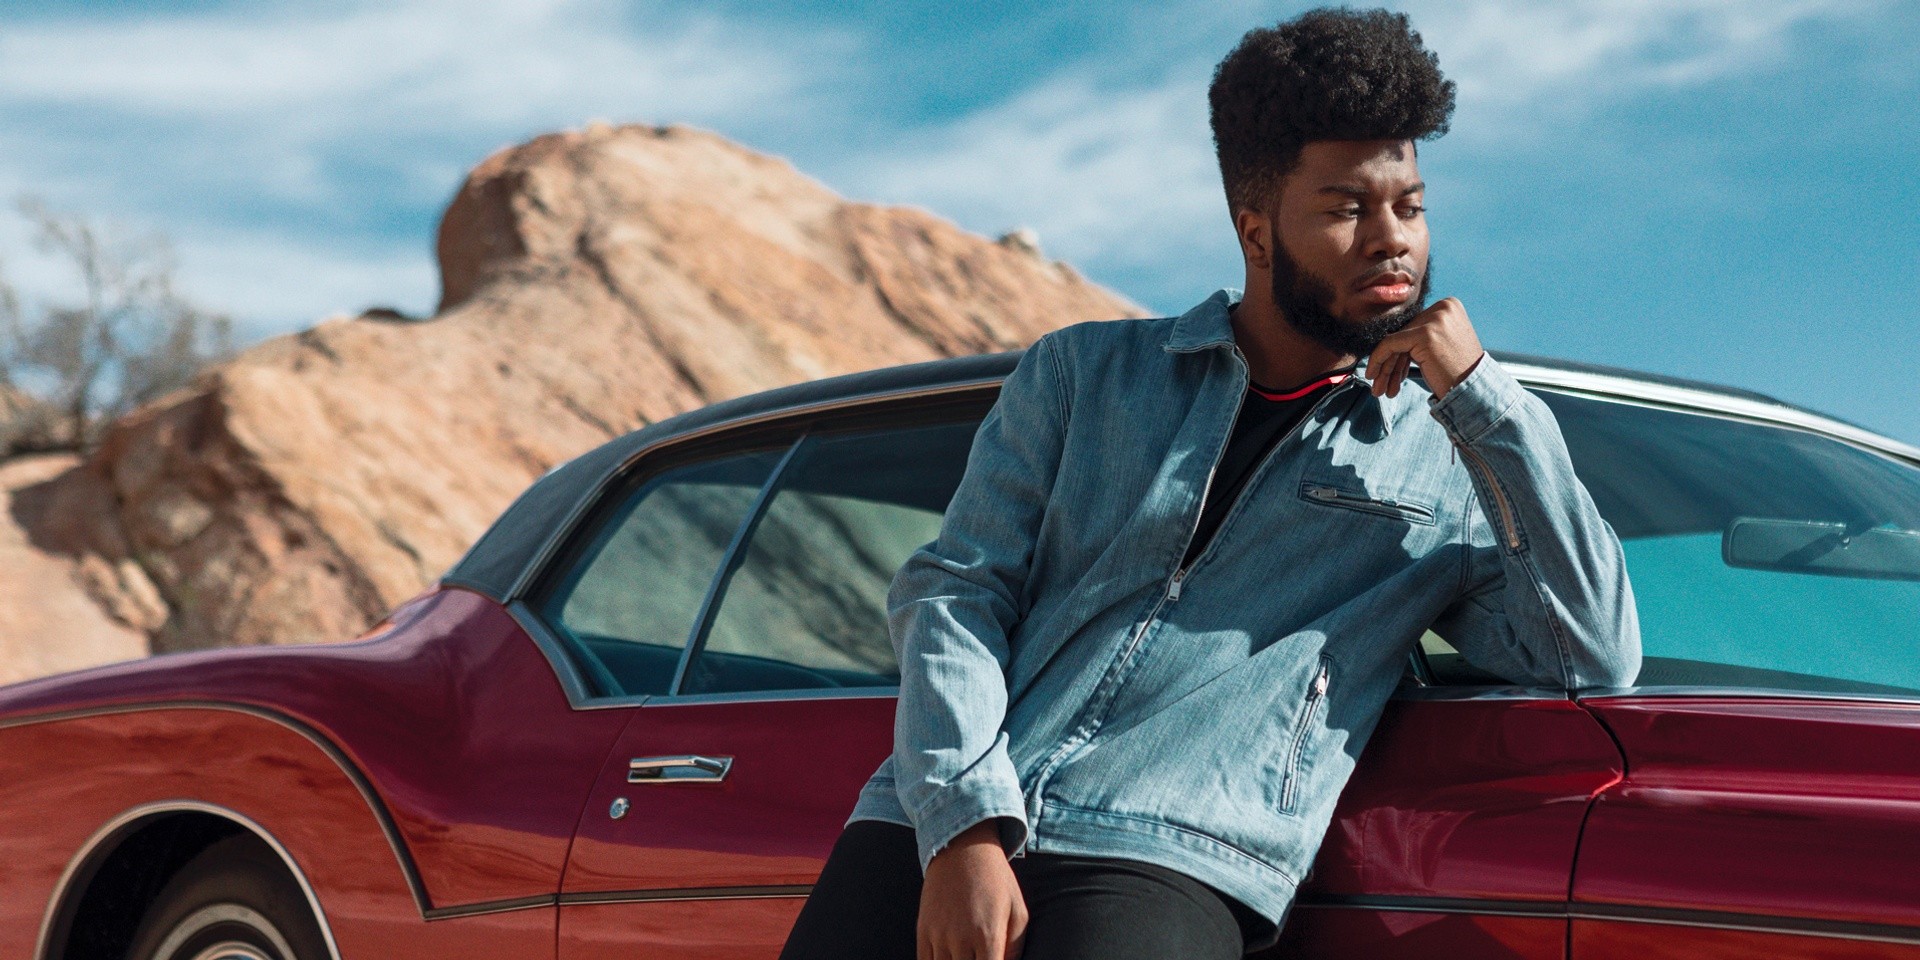 Pop artist Khalid to perform in Singapore on American Teen Tour